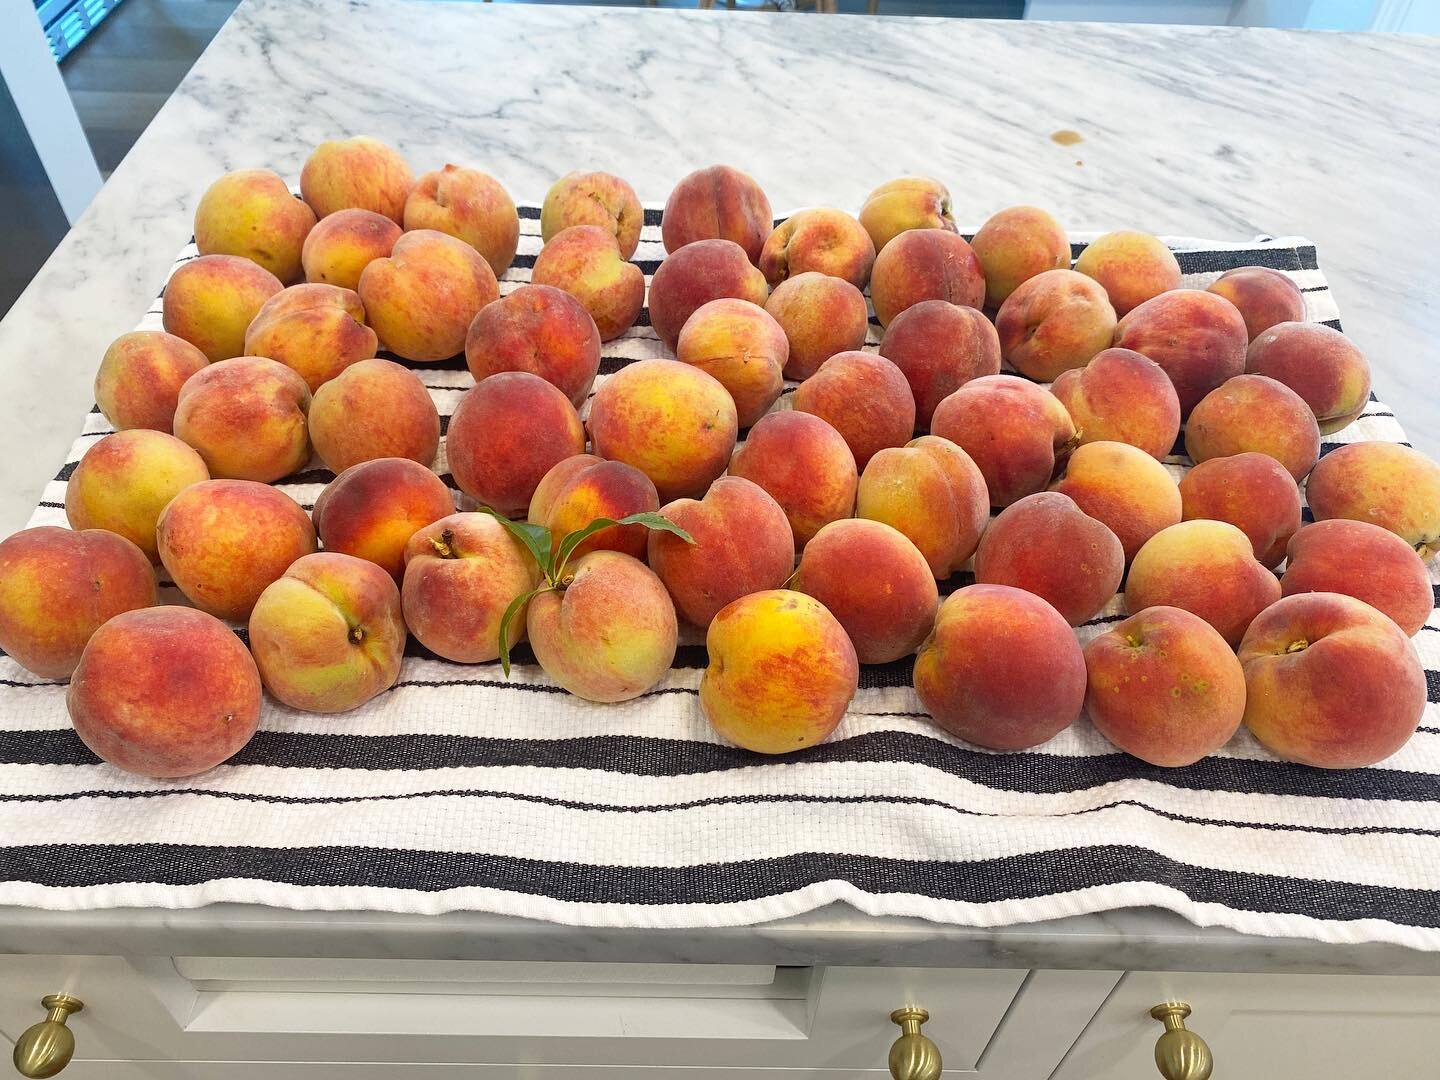 Todays harvest from our peach tree😍 bringing in these sweet things with the little one made me so so happy. I thought to myself, &ldquo;Why did I not live this way long ago? #peaches #homestead #blessedandgrateful